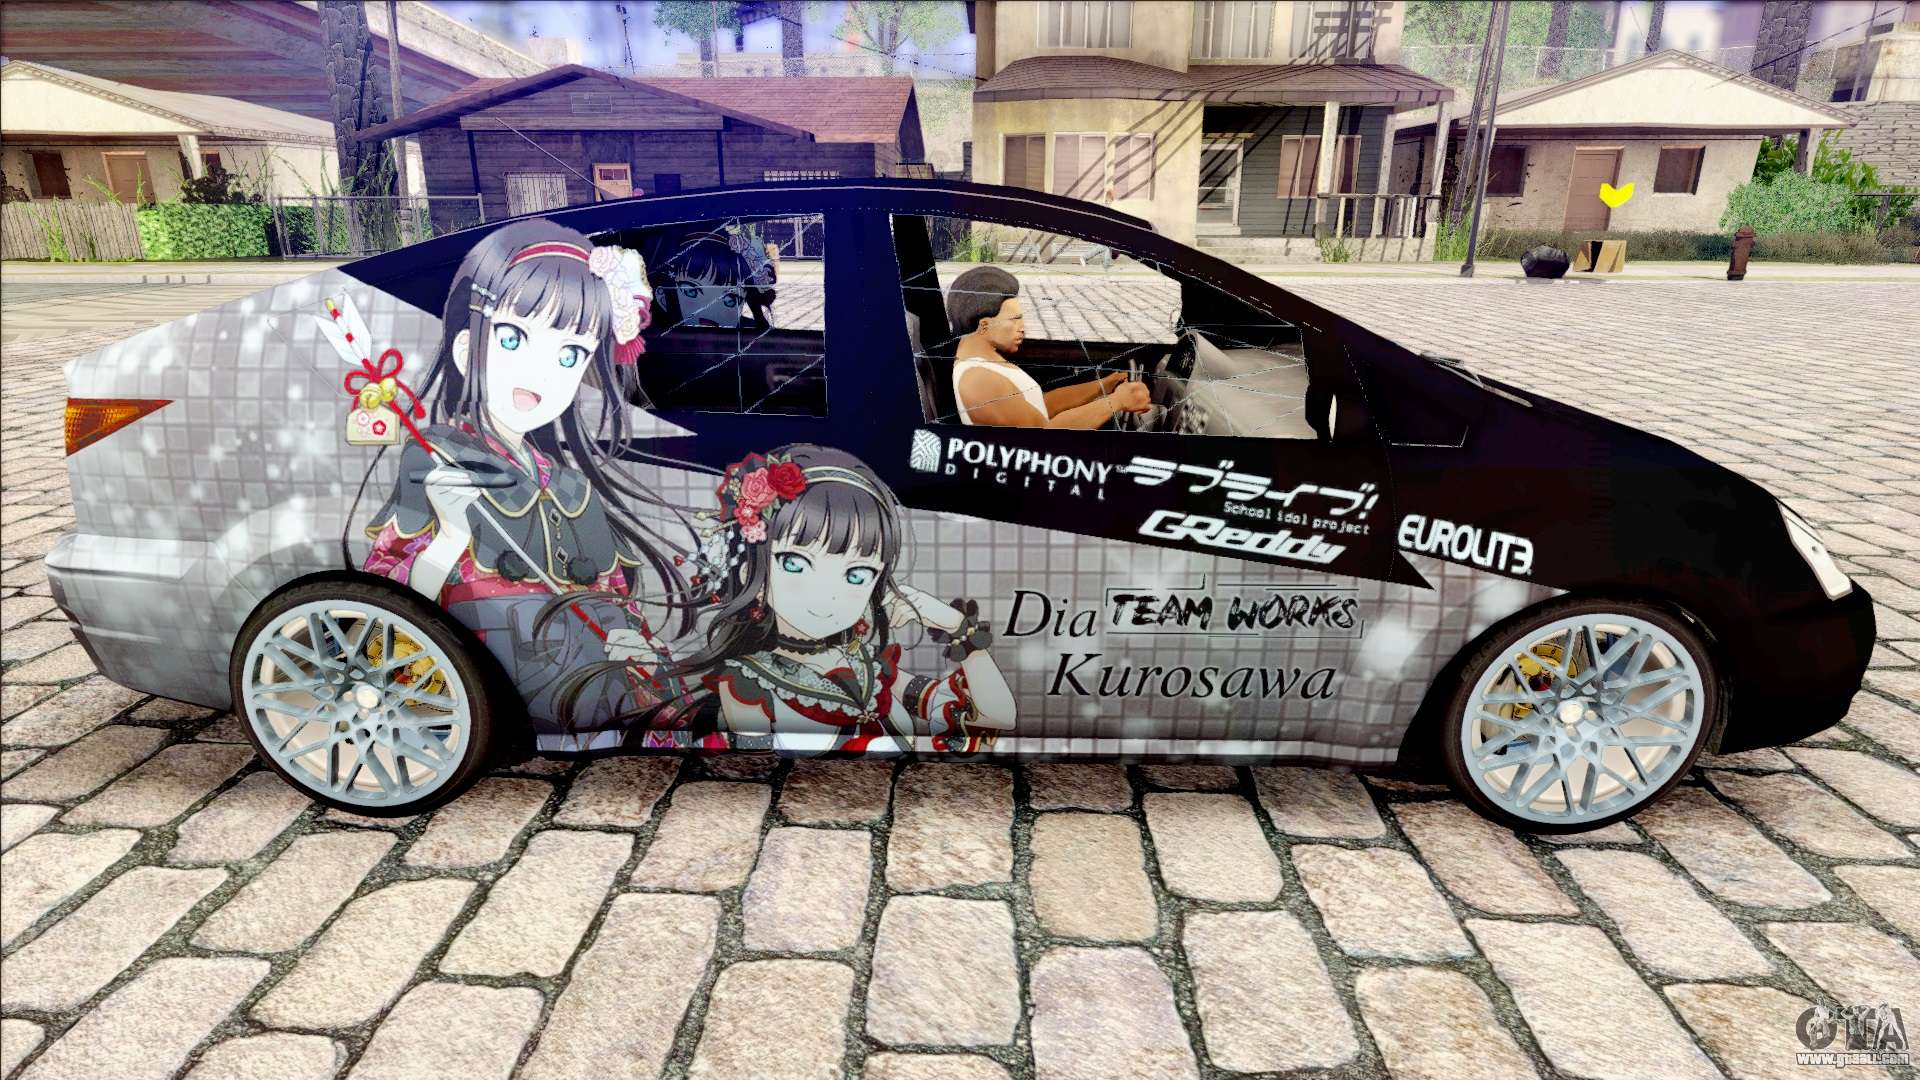 Featured image of post Gta V Anime Car Image of gta cars with anime livery ent pgk granty stipendii